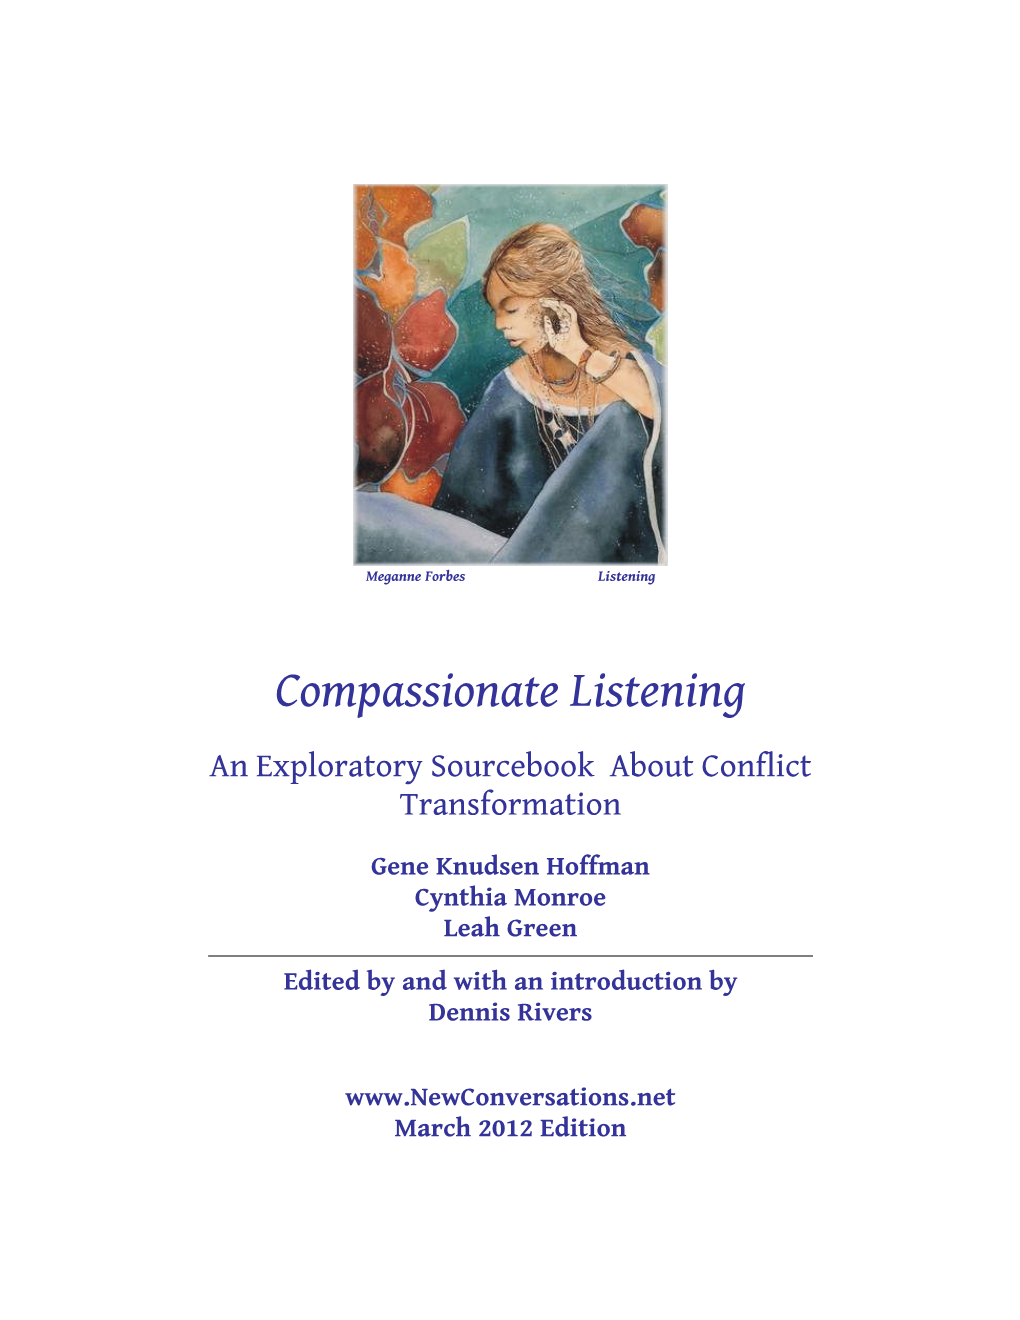 Compassionate Listening: an Exploratory Sourcebook About Conflict Transformation